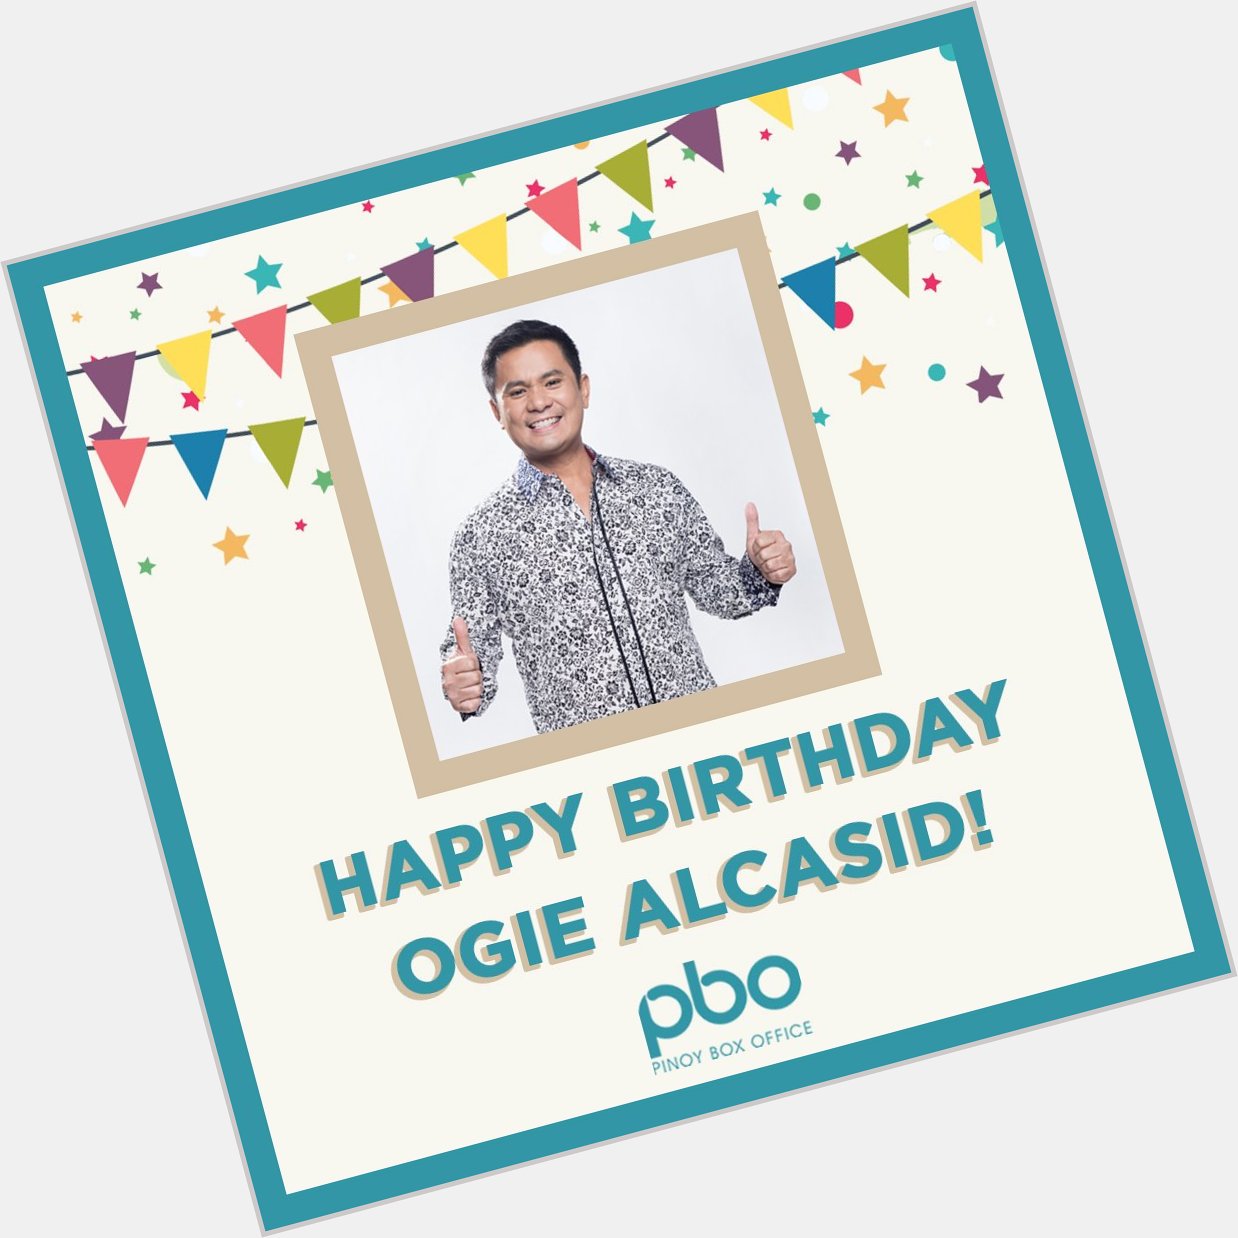 Happy Birthday Ogie Alcasid! Wishing you an amazing day and prosperous year ahead!  